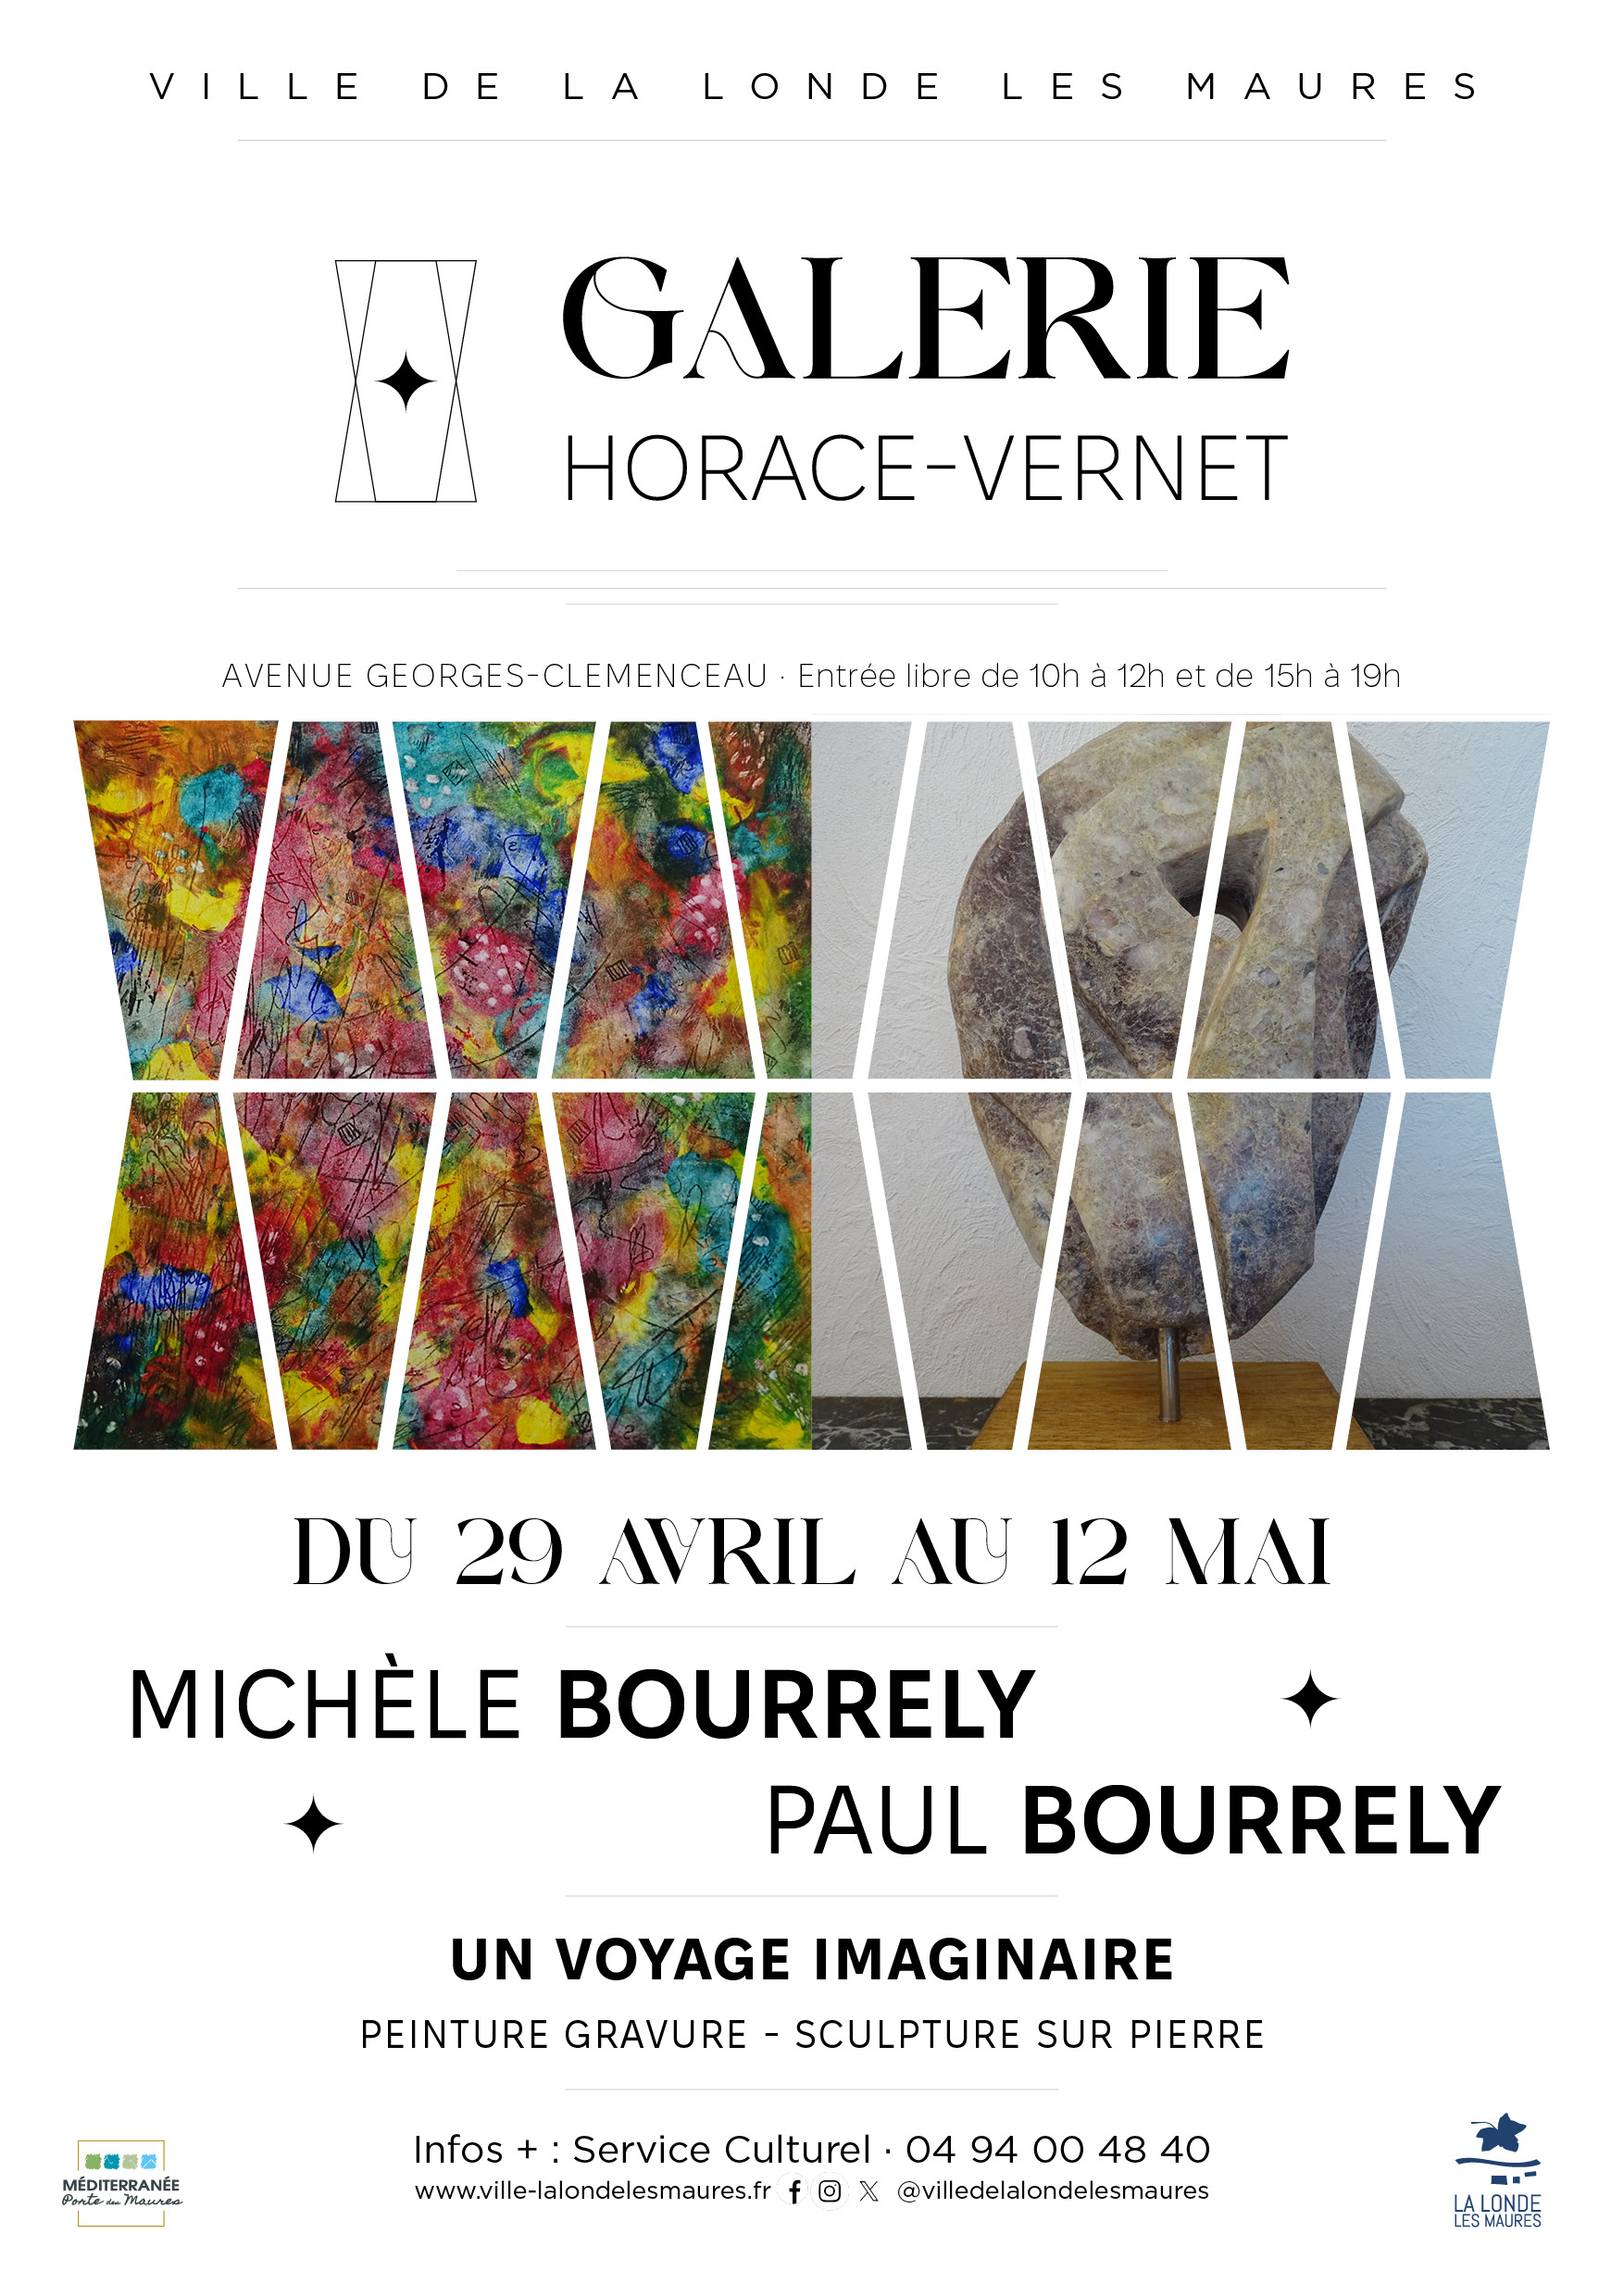 03 A3 GALERIE HORACE VERNET BOURRELY